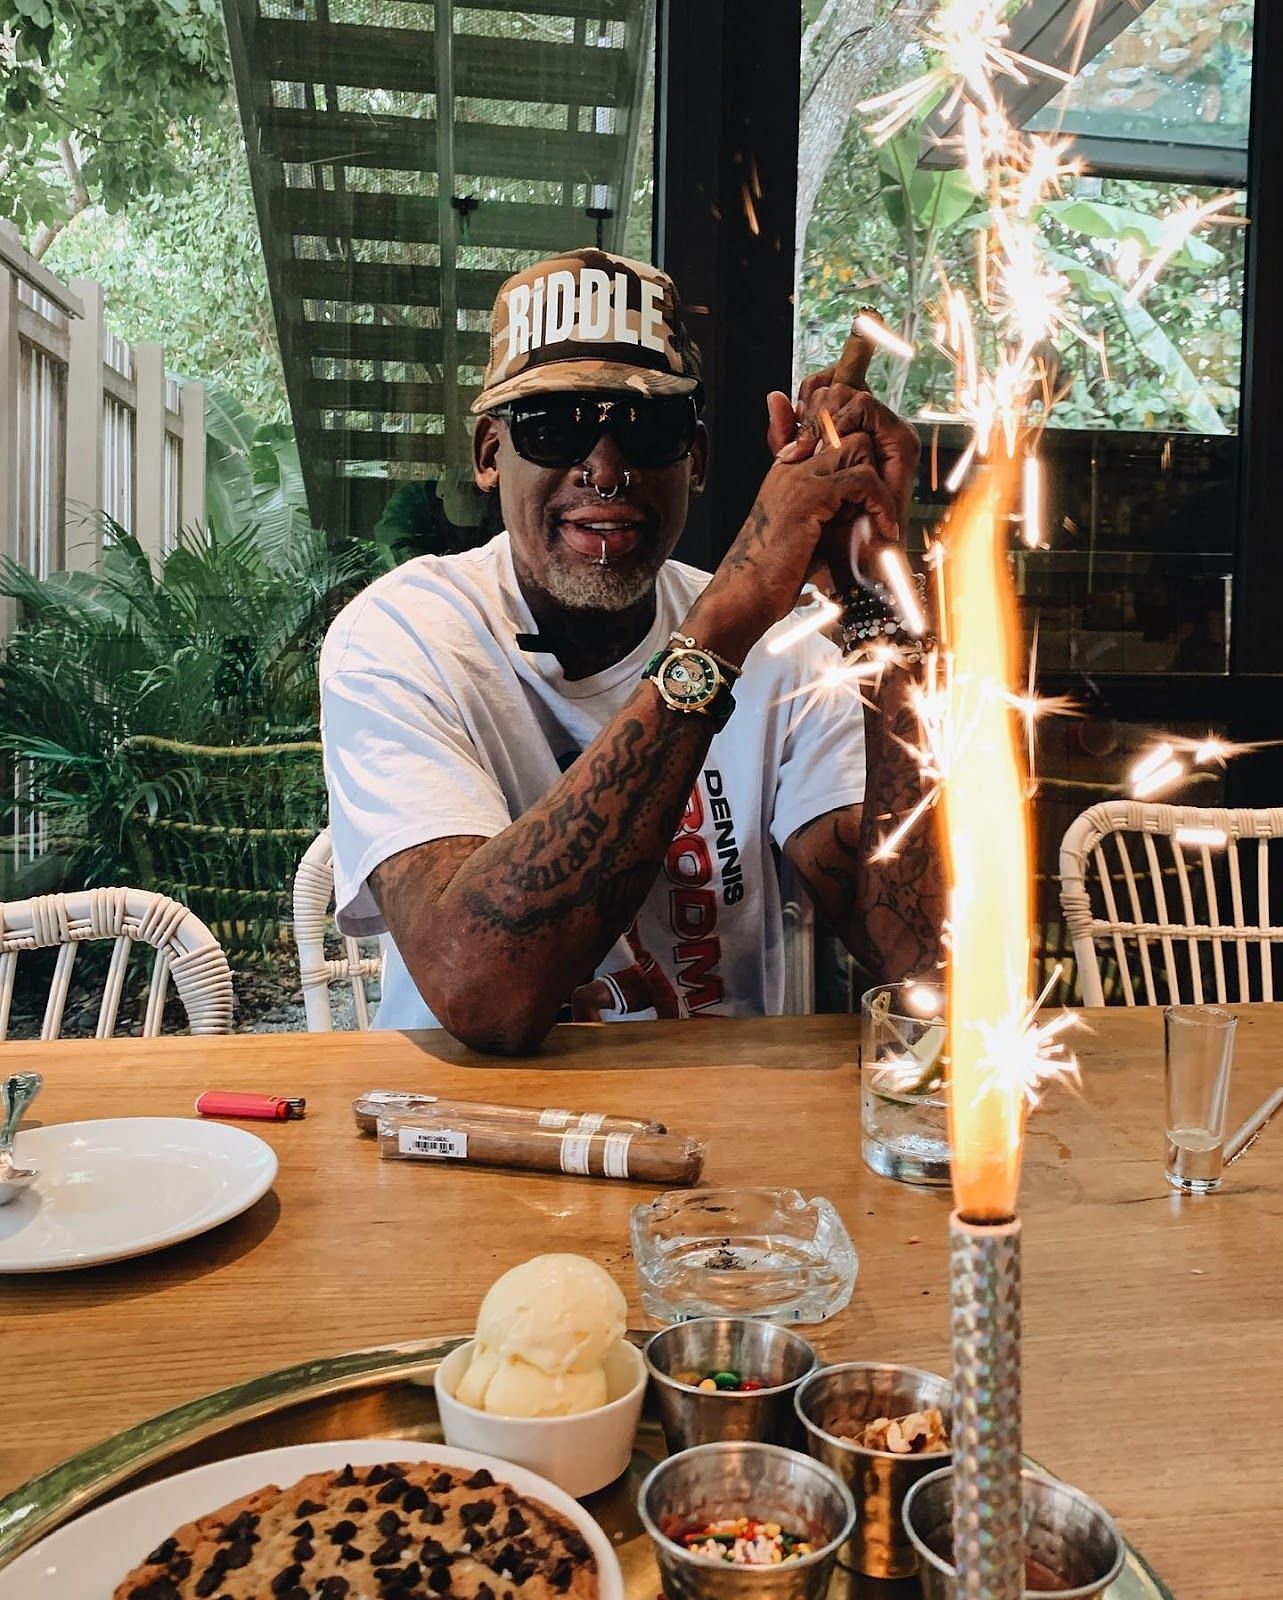 Dennis Rodman's net worth explored - it's less than you might think